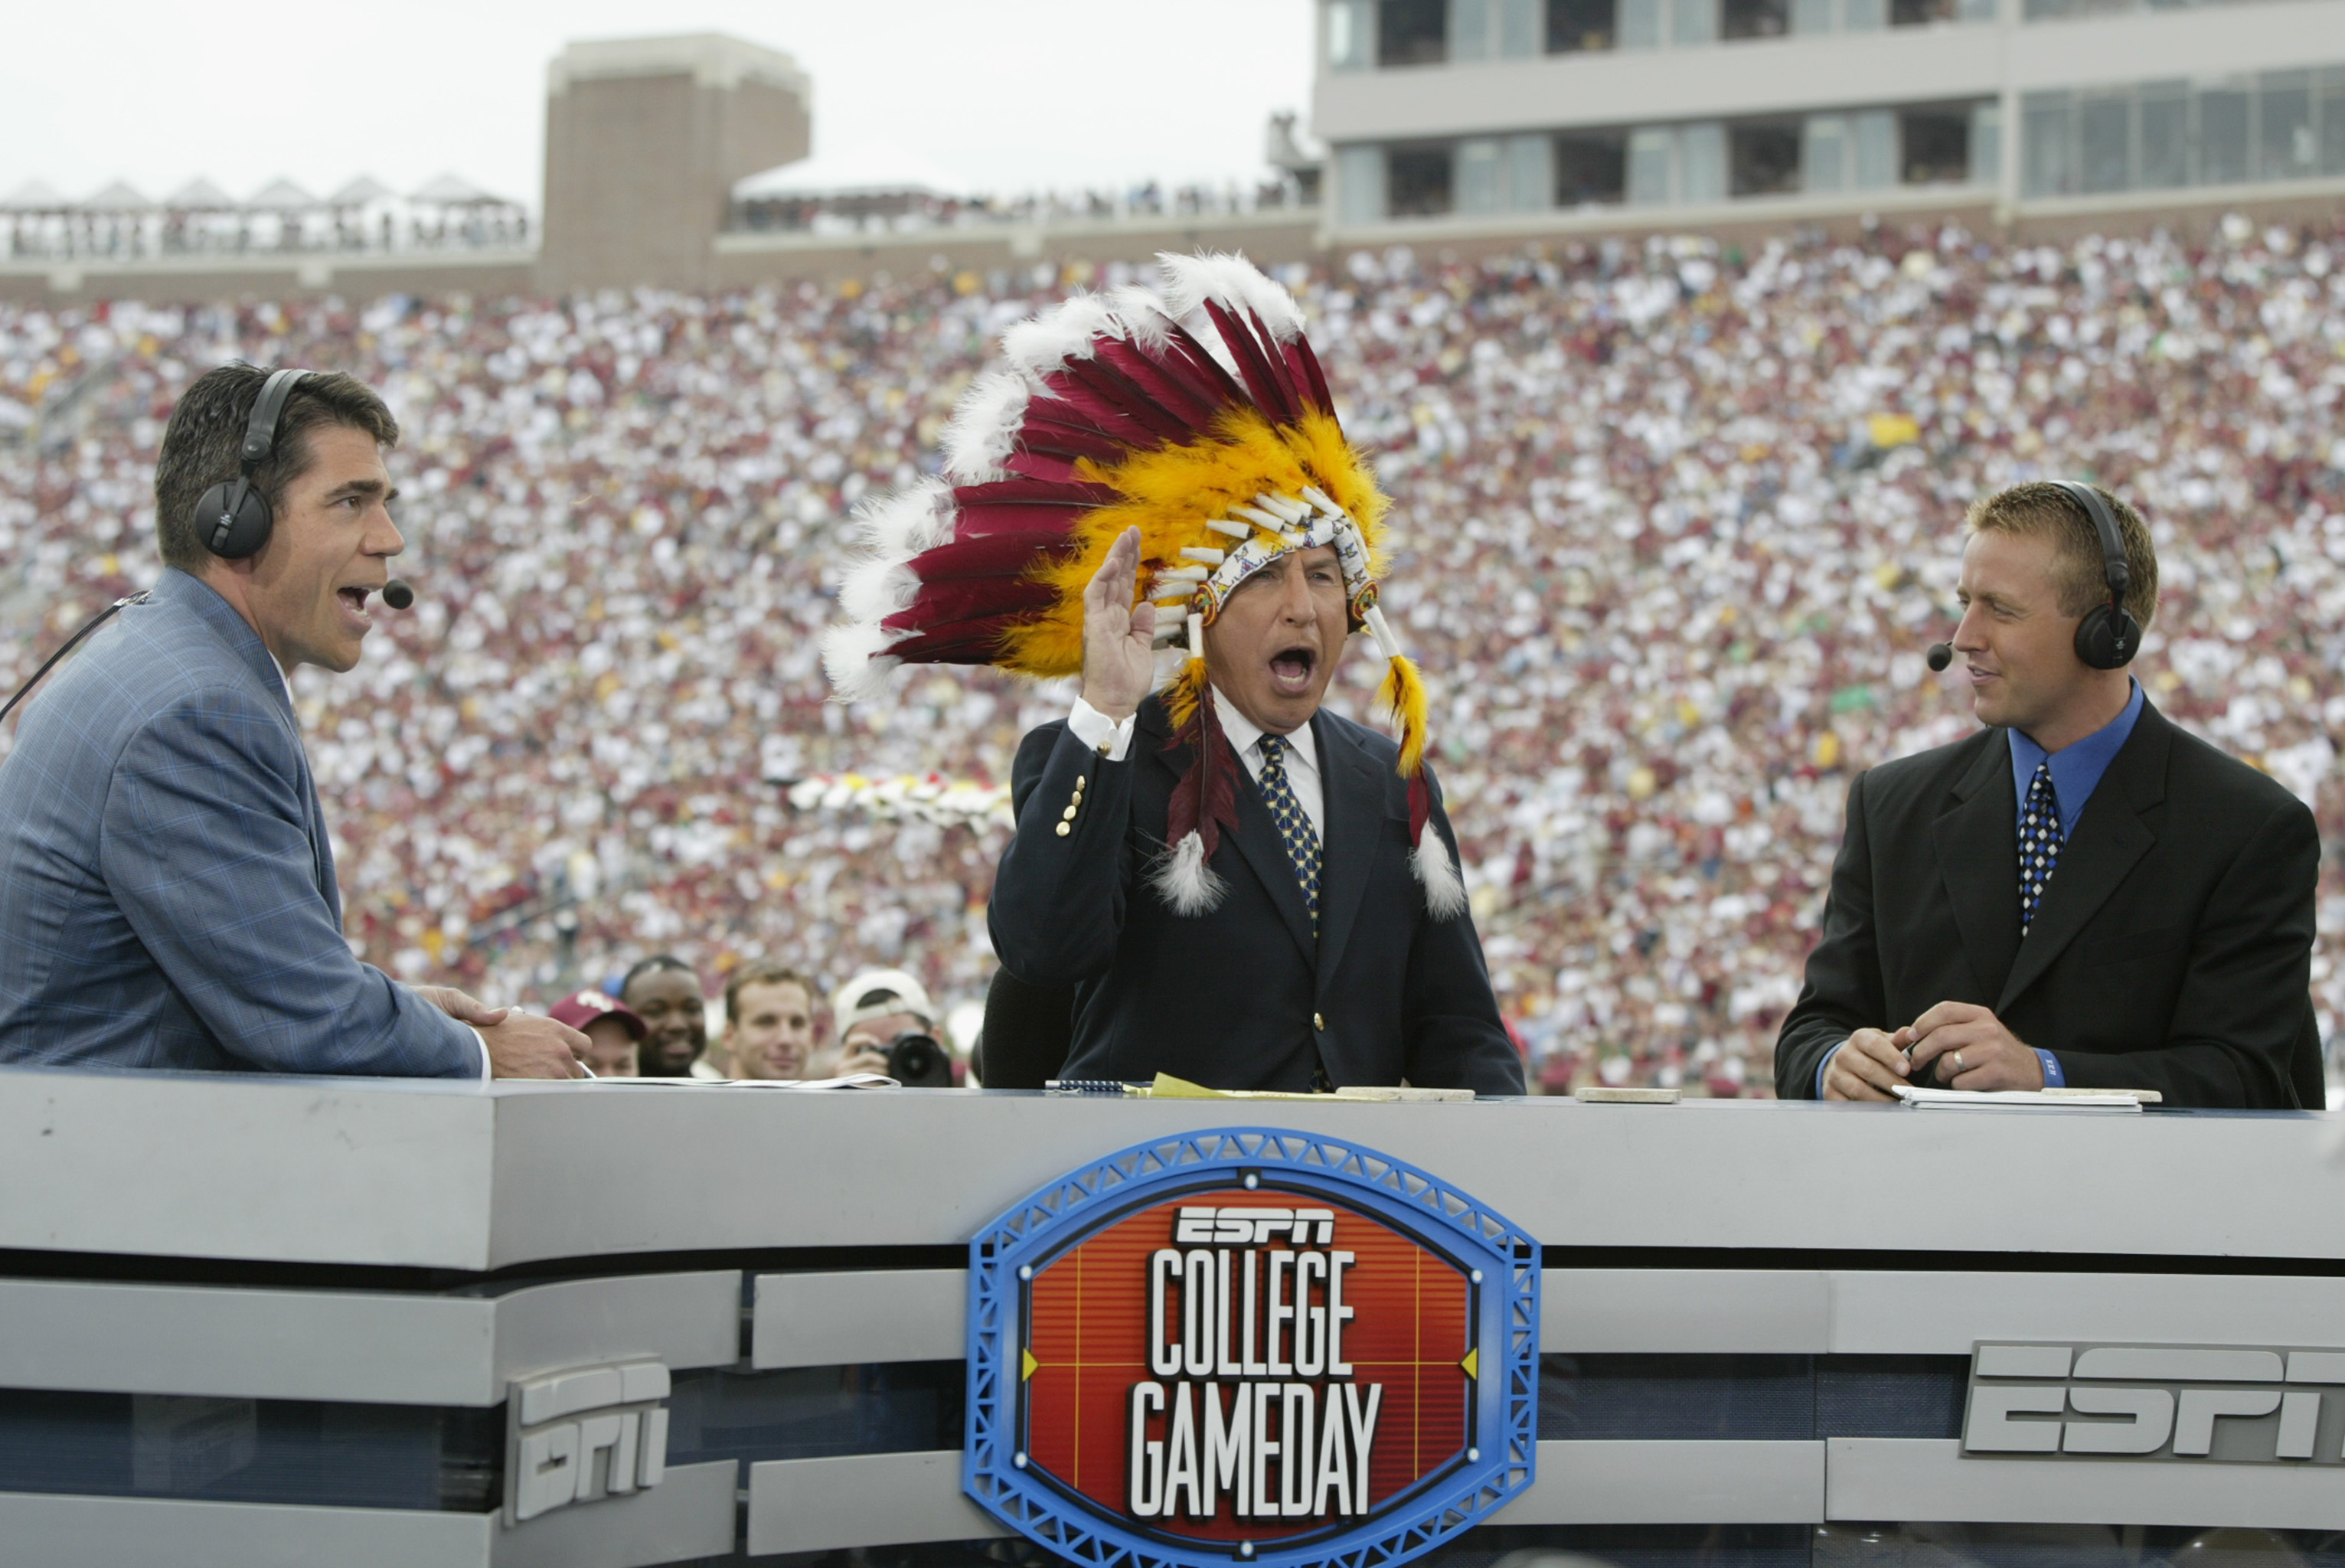 College GameDay: 10 Things ESPN Must Change To Keep Us Watching